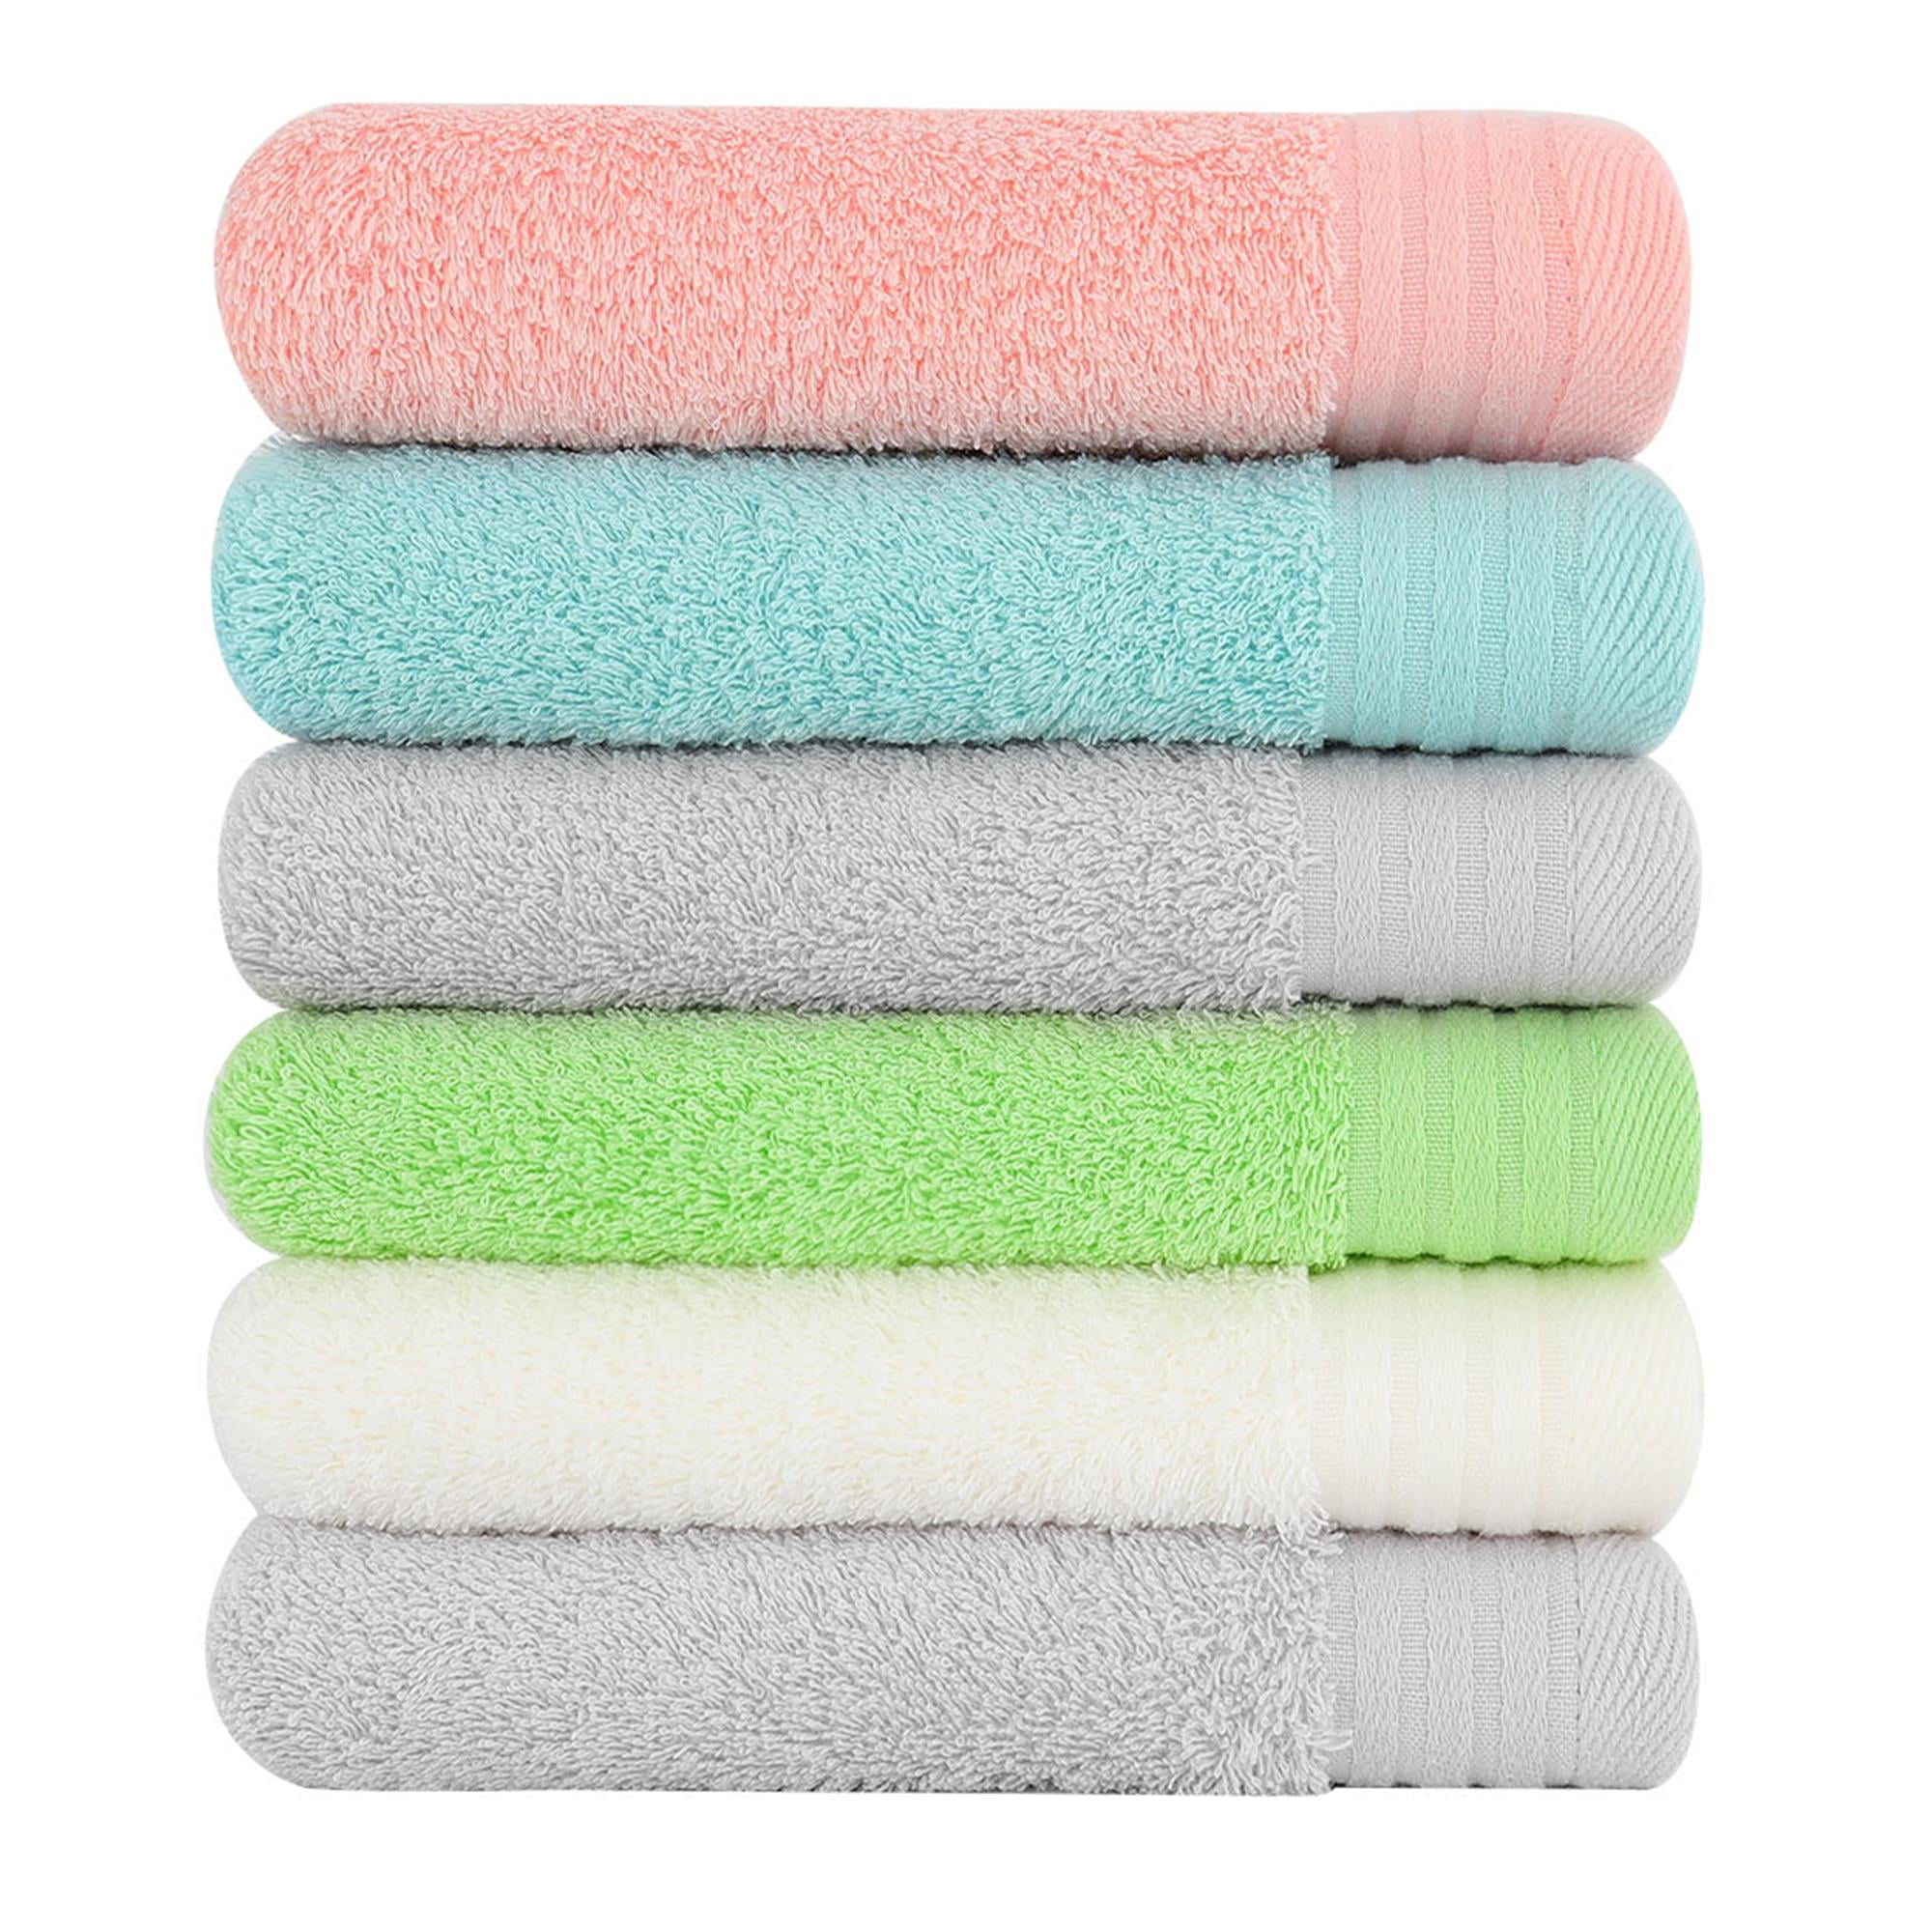 6 COTTON BATH TOWELS LARGE 25X50 400 GSM, super soft and multi colored